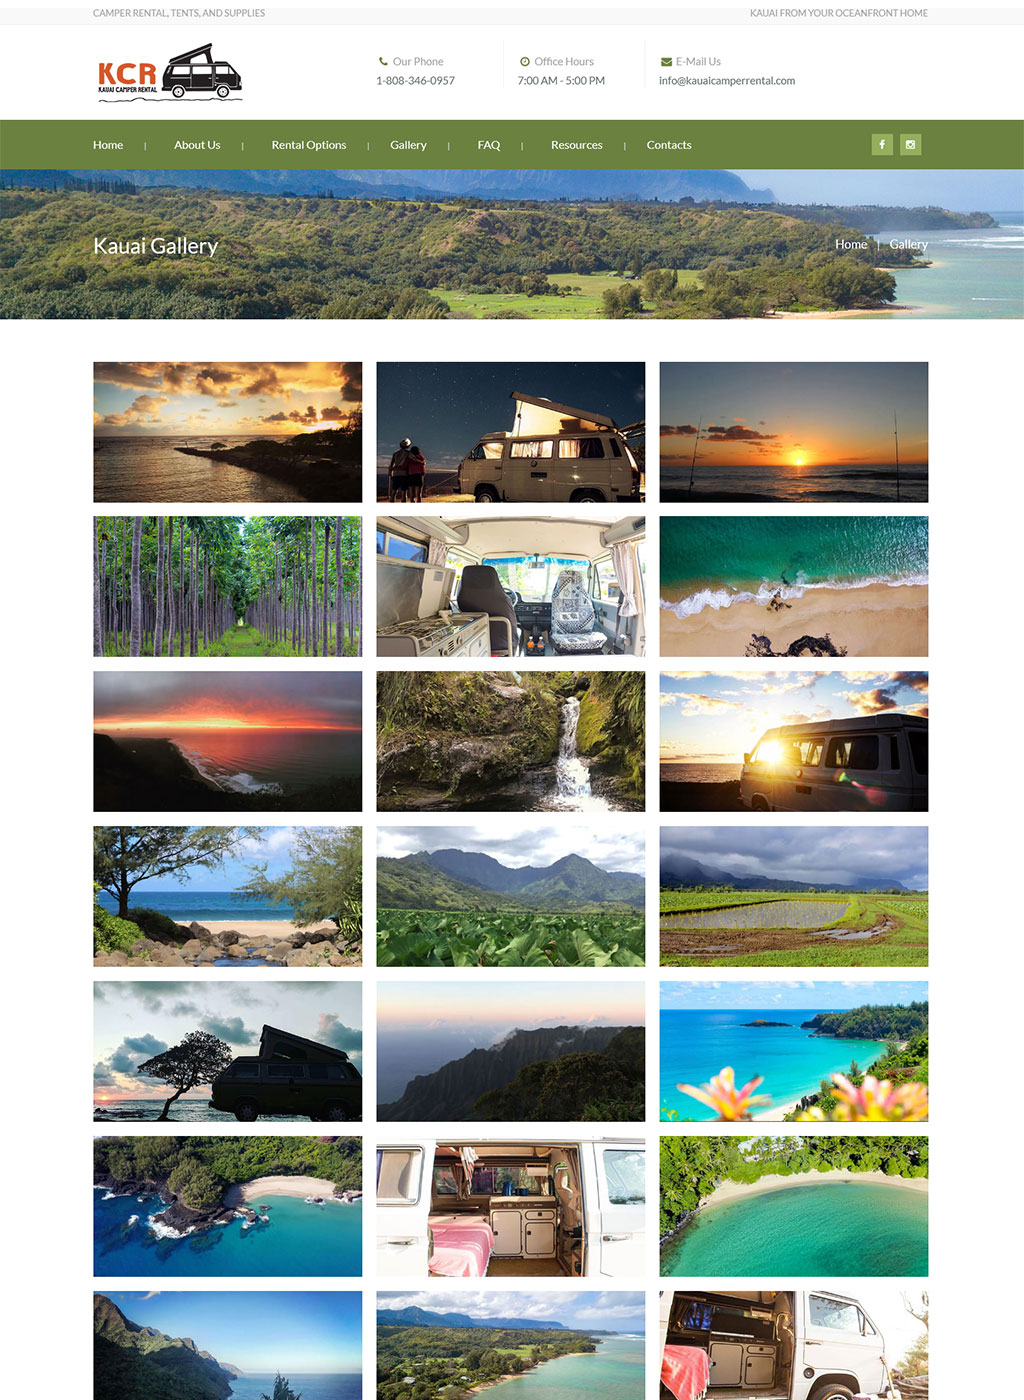 Gallery page developed for Kauai camper rental business